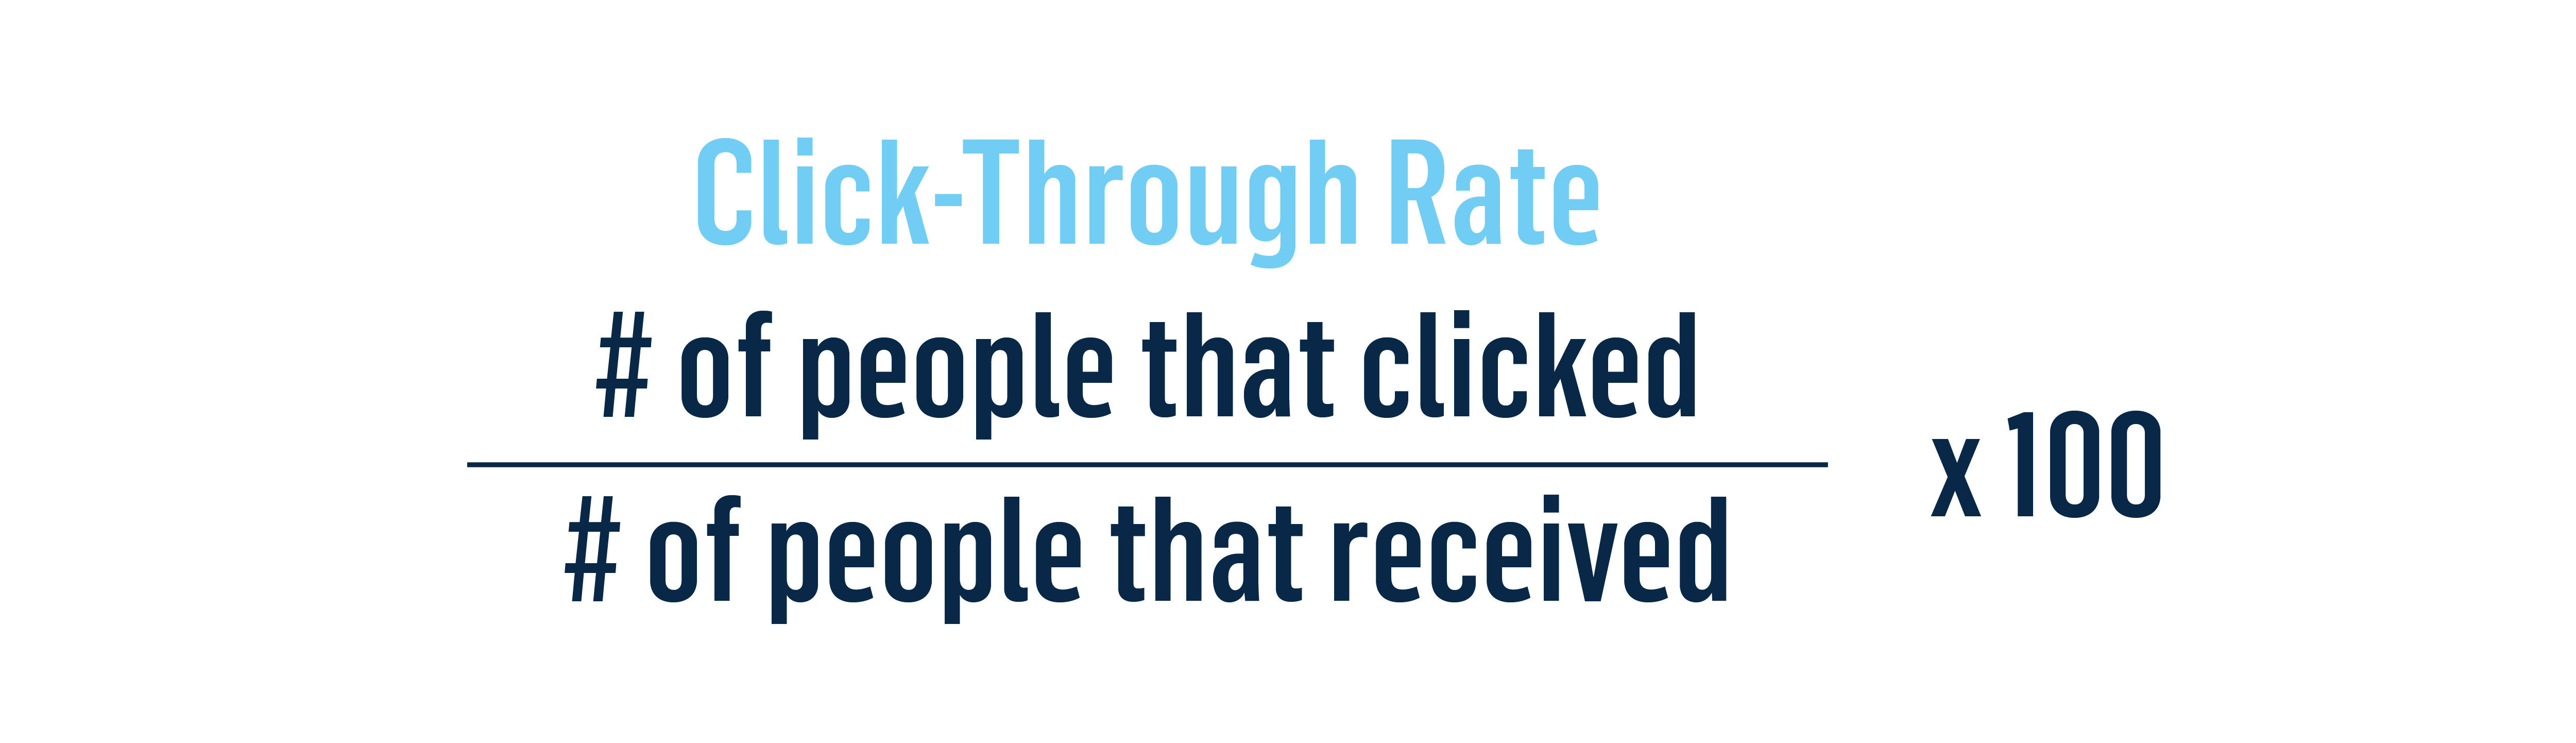 Click-Through Rate: # of people that clicked / # of people that received x 100